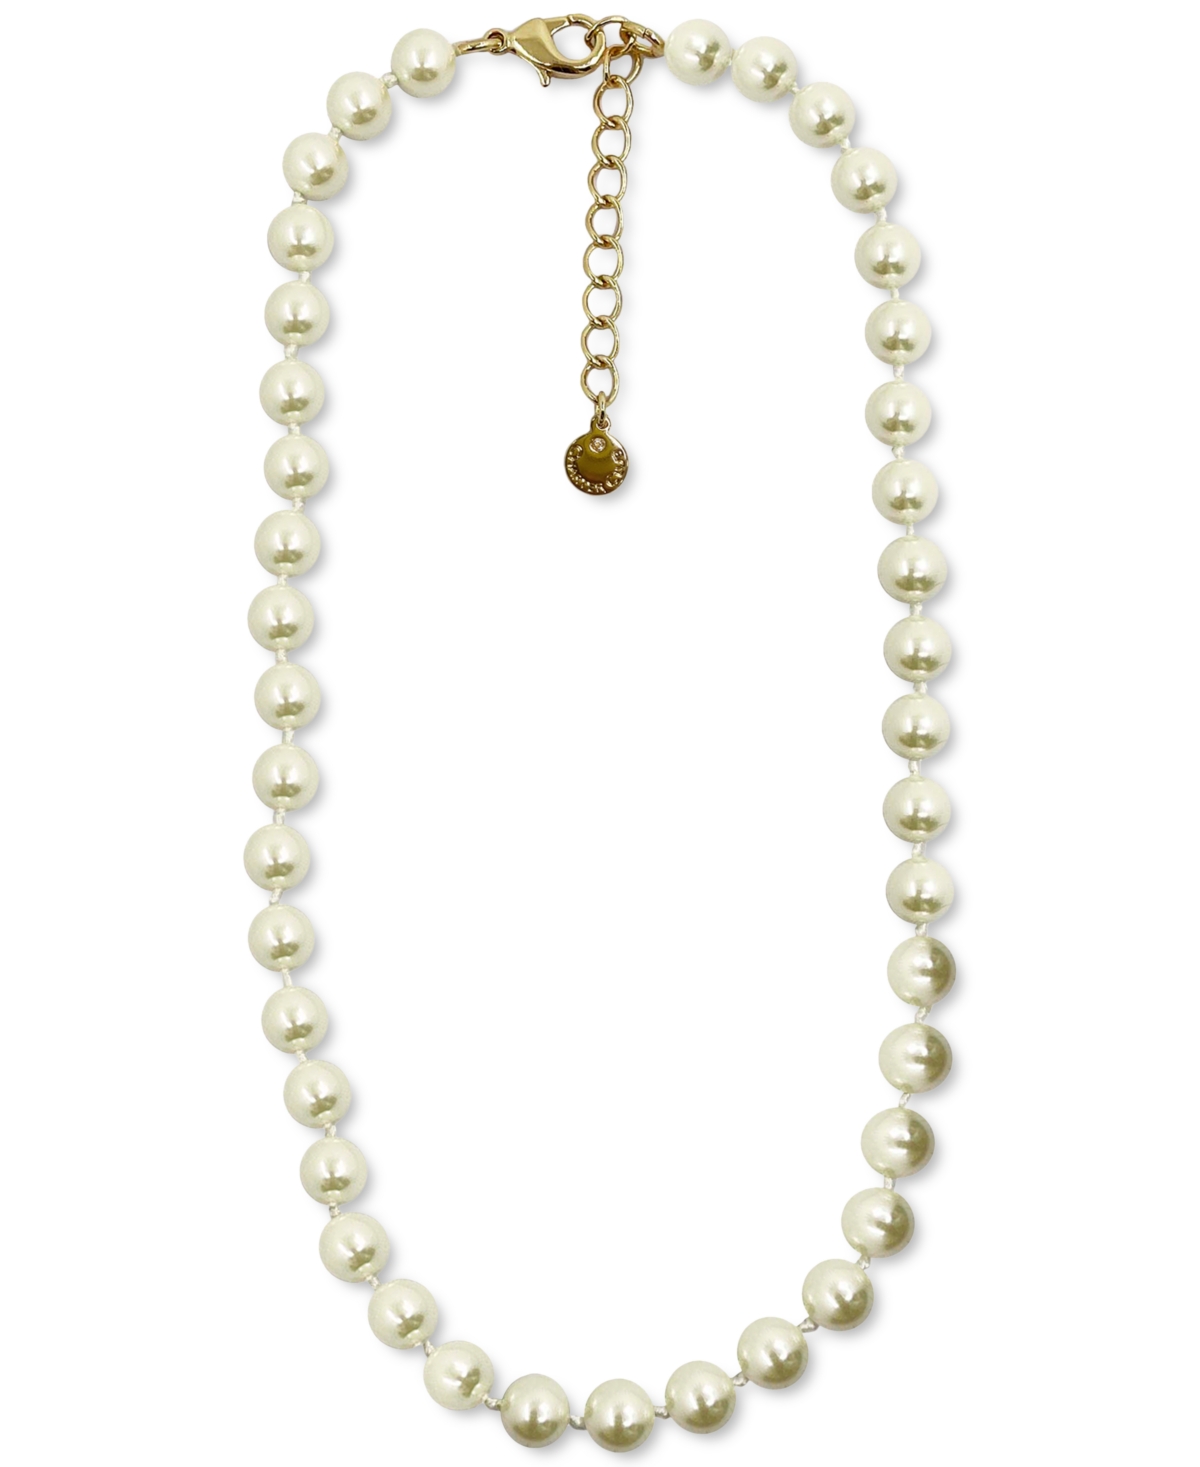 Gold-Tone Imitation Pearl Collar Necklace, Created for Macy's - Gold